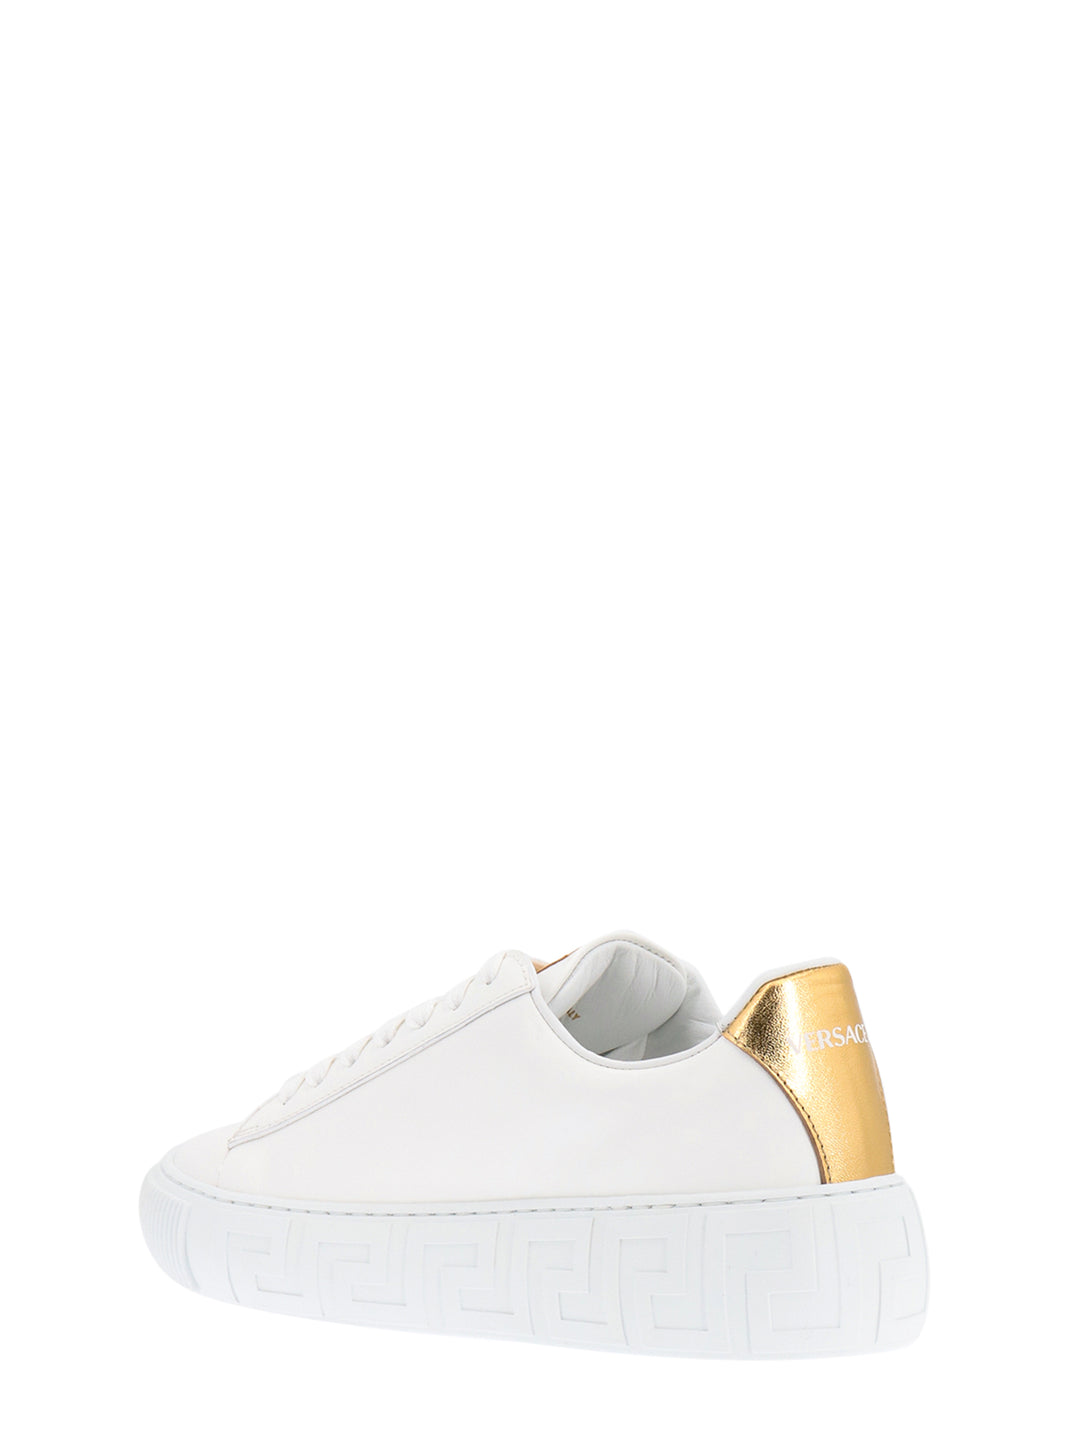 Sneakers in pelle con stampa logo golden laterale